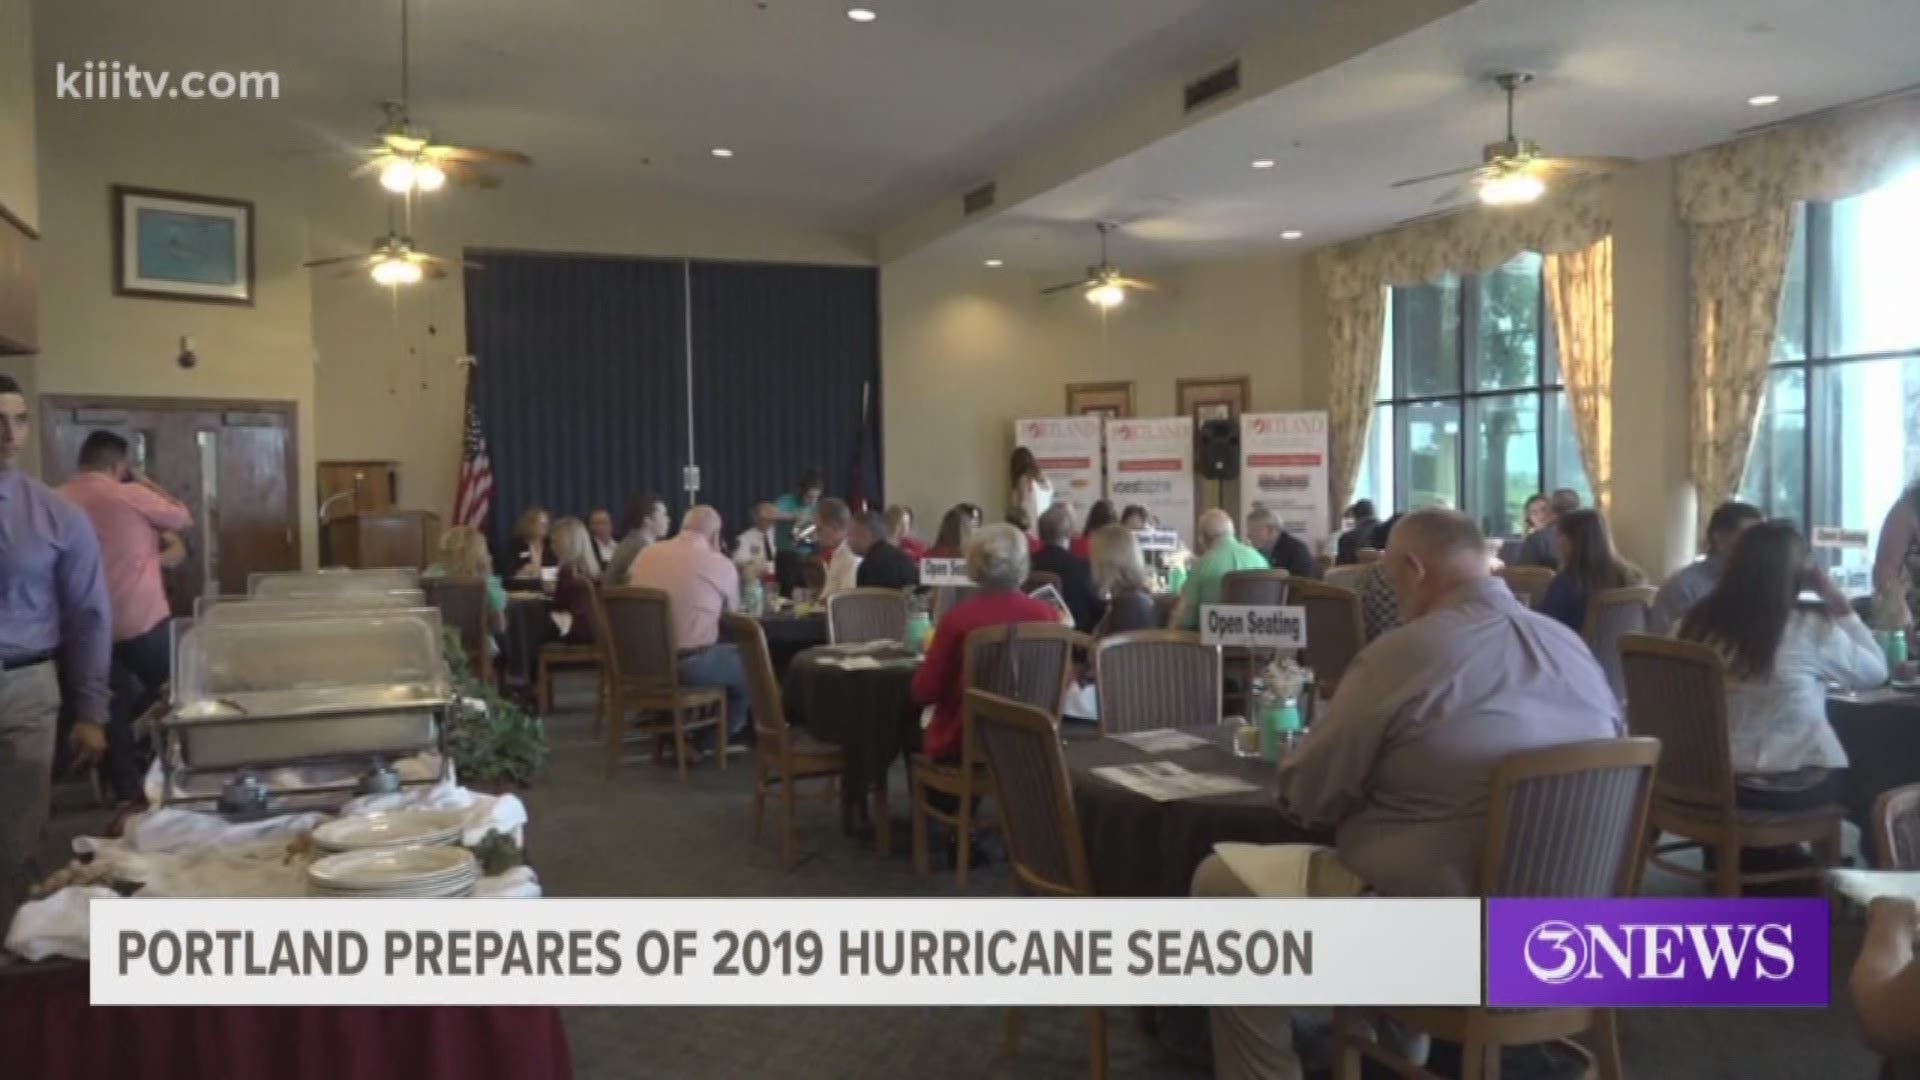 The Portland Chamber of Commerce hosted a hurricane awareness breakfast Thursday at Northshore Country Club to prepare for the 2019 hurricane season.